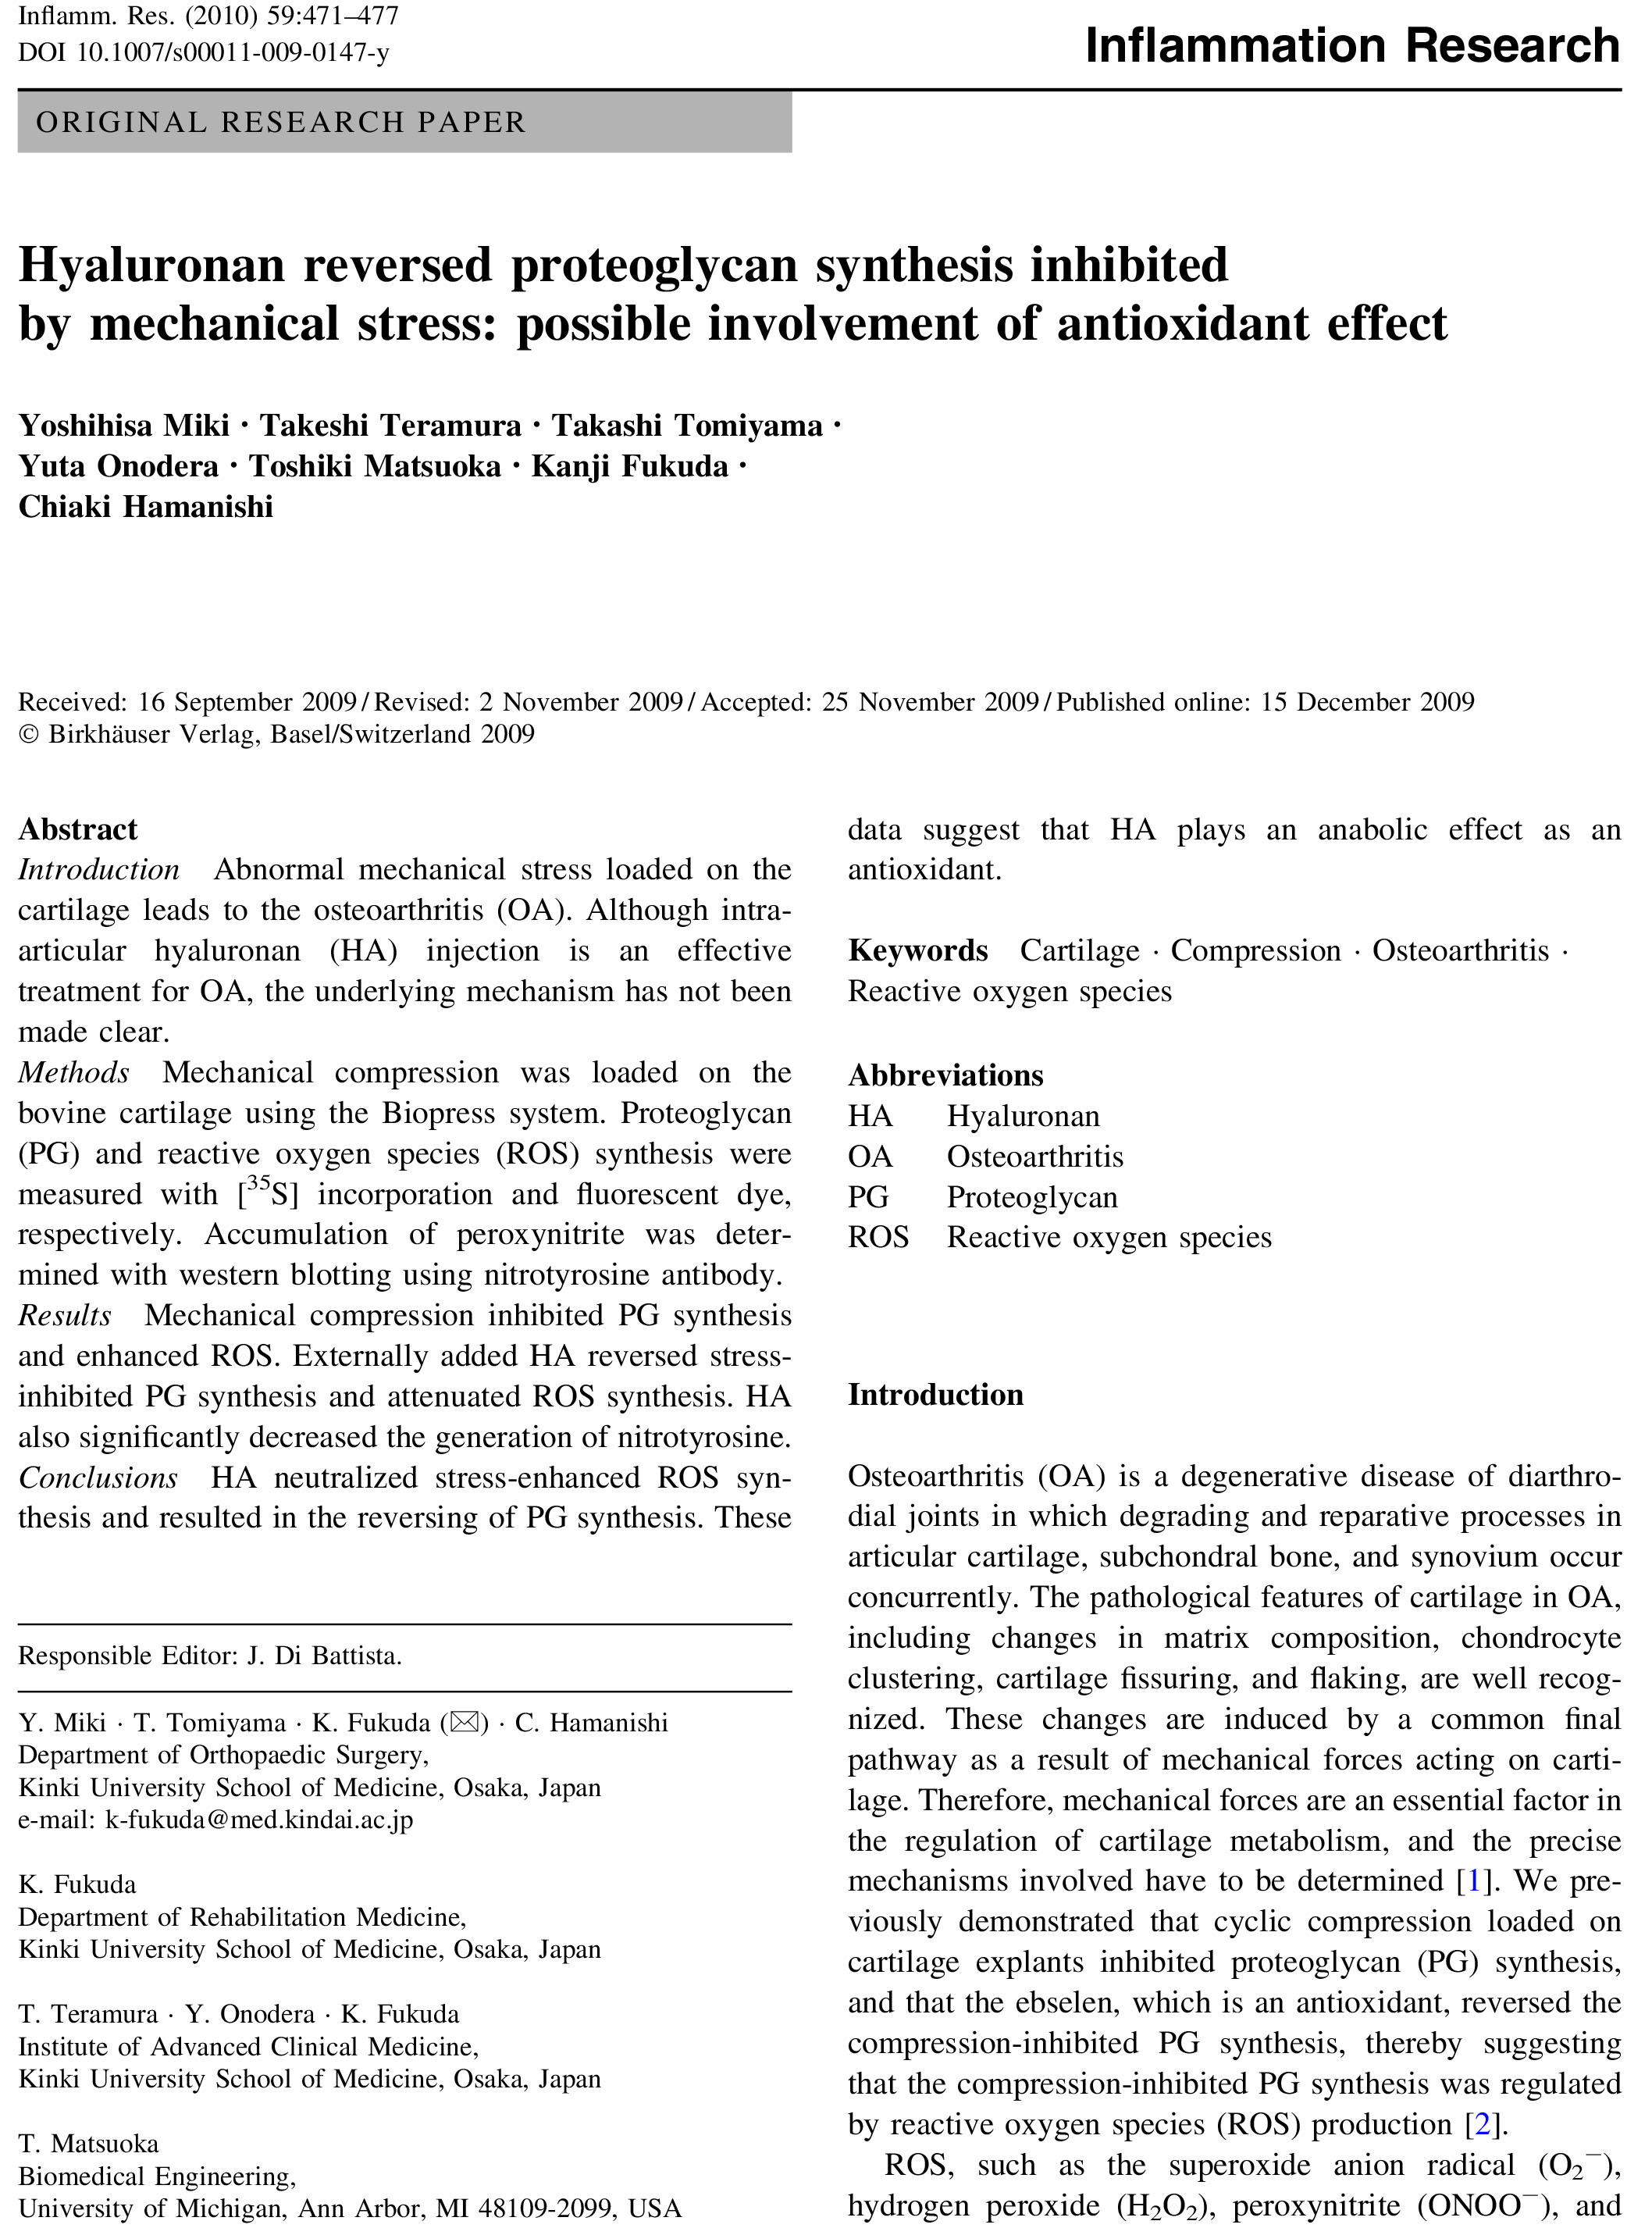 Hyaluronan_reversed_proteoglycan_sythesis_inhibited_by_mehanical_stress-2.jpg